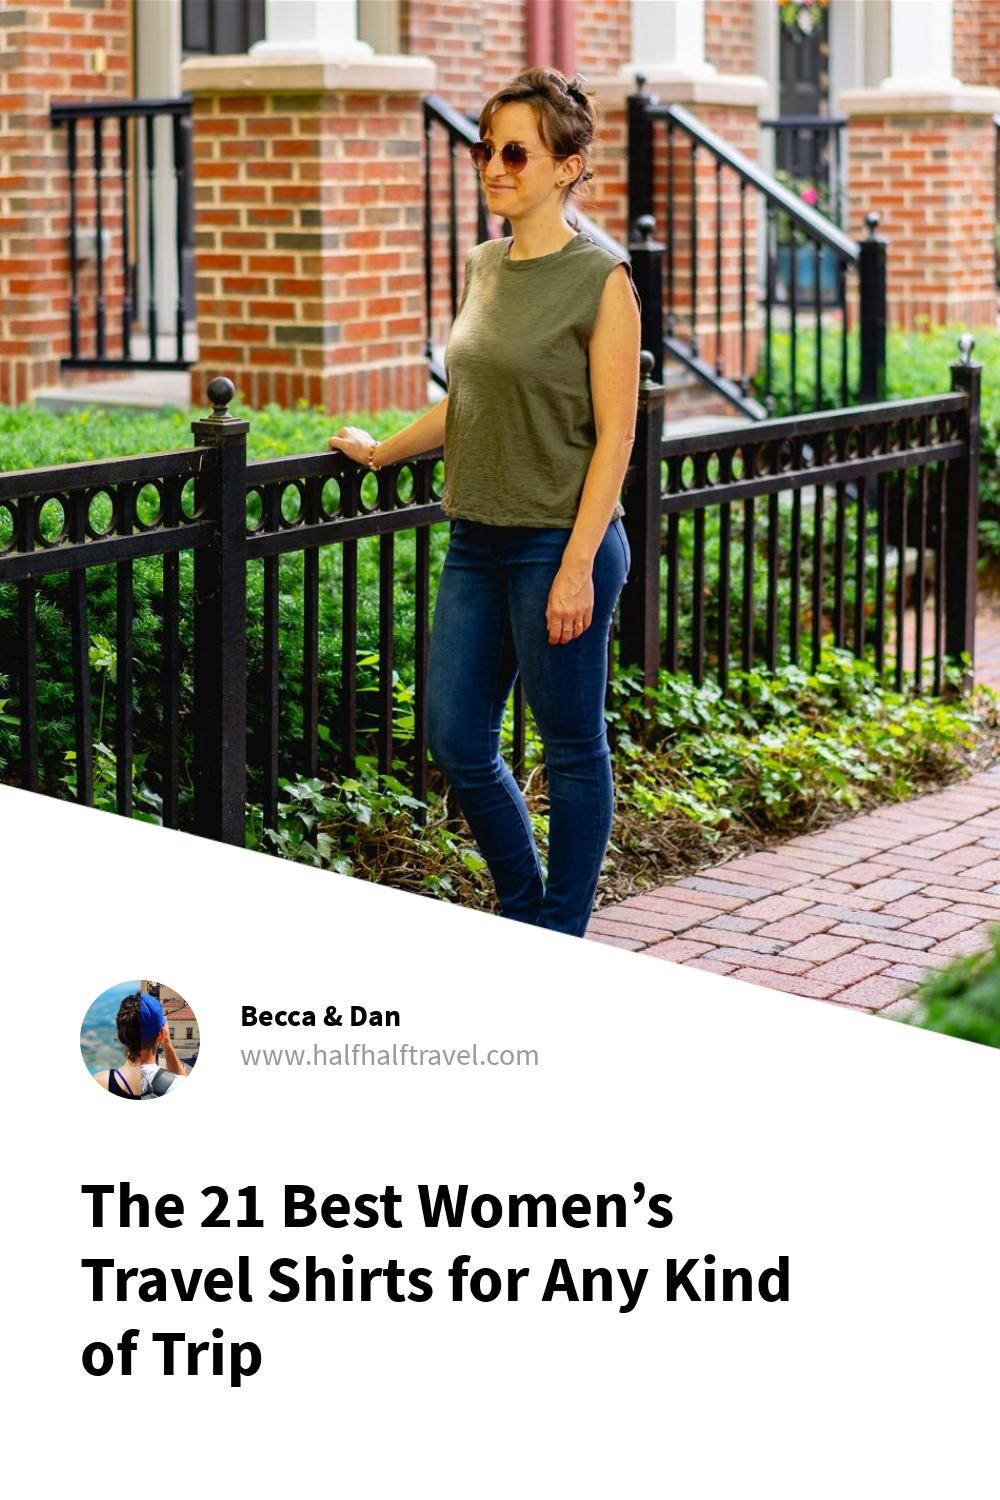 Pinterest image from the 'The 21 Best Women’s Travel Shirts for Any Kind of Trip' article on Half Half Travel